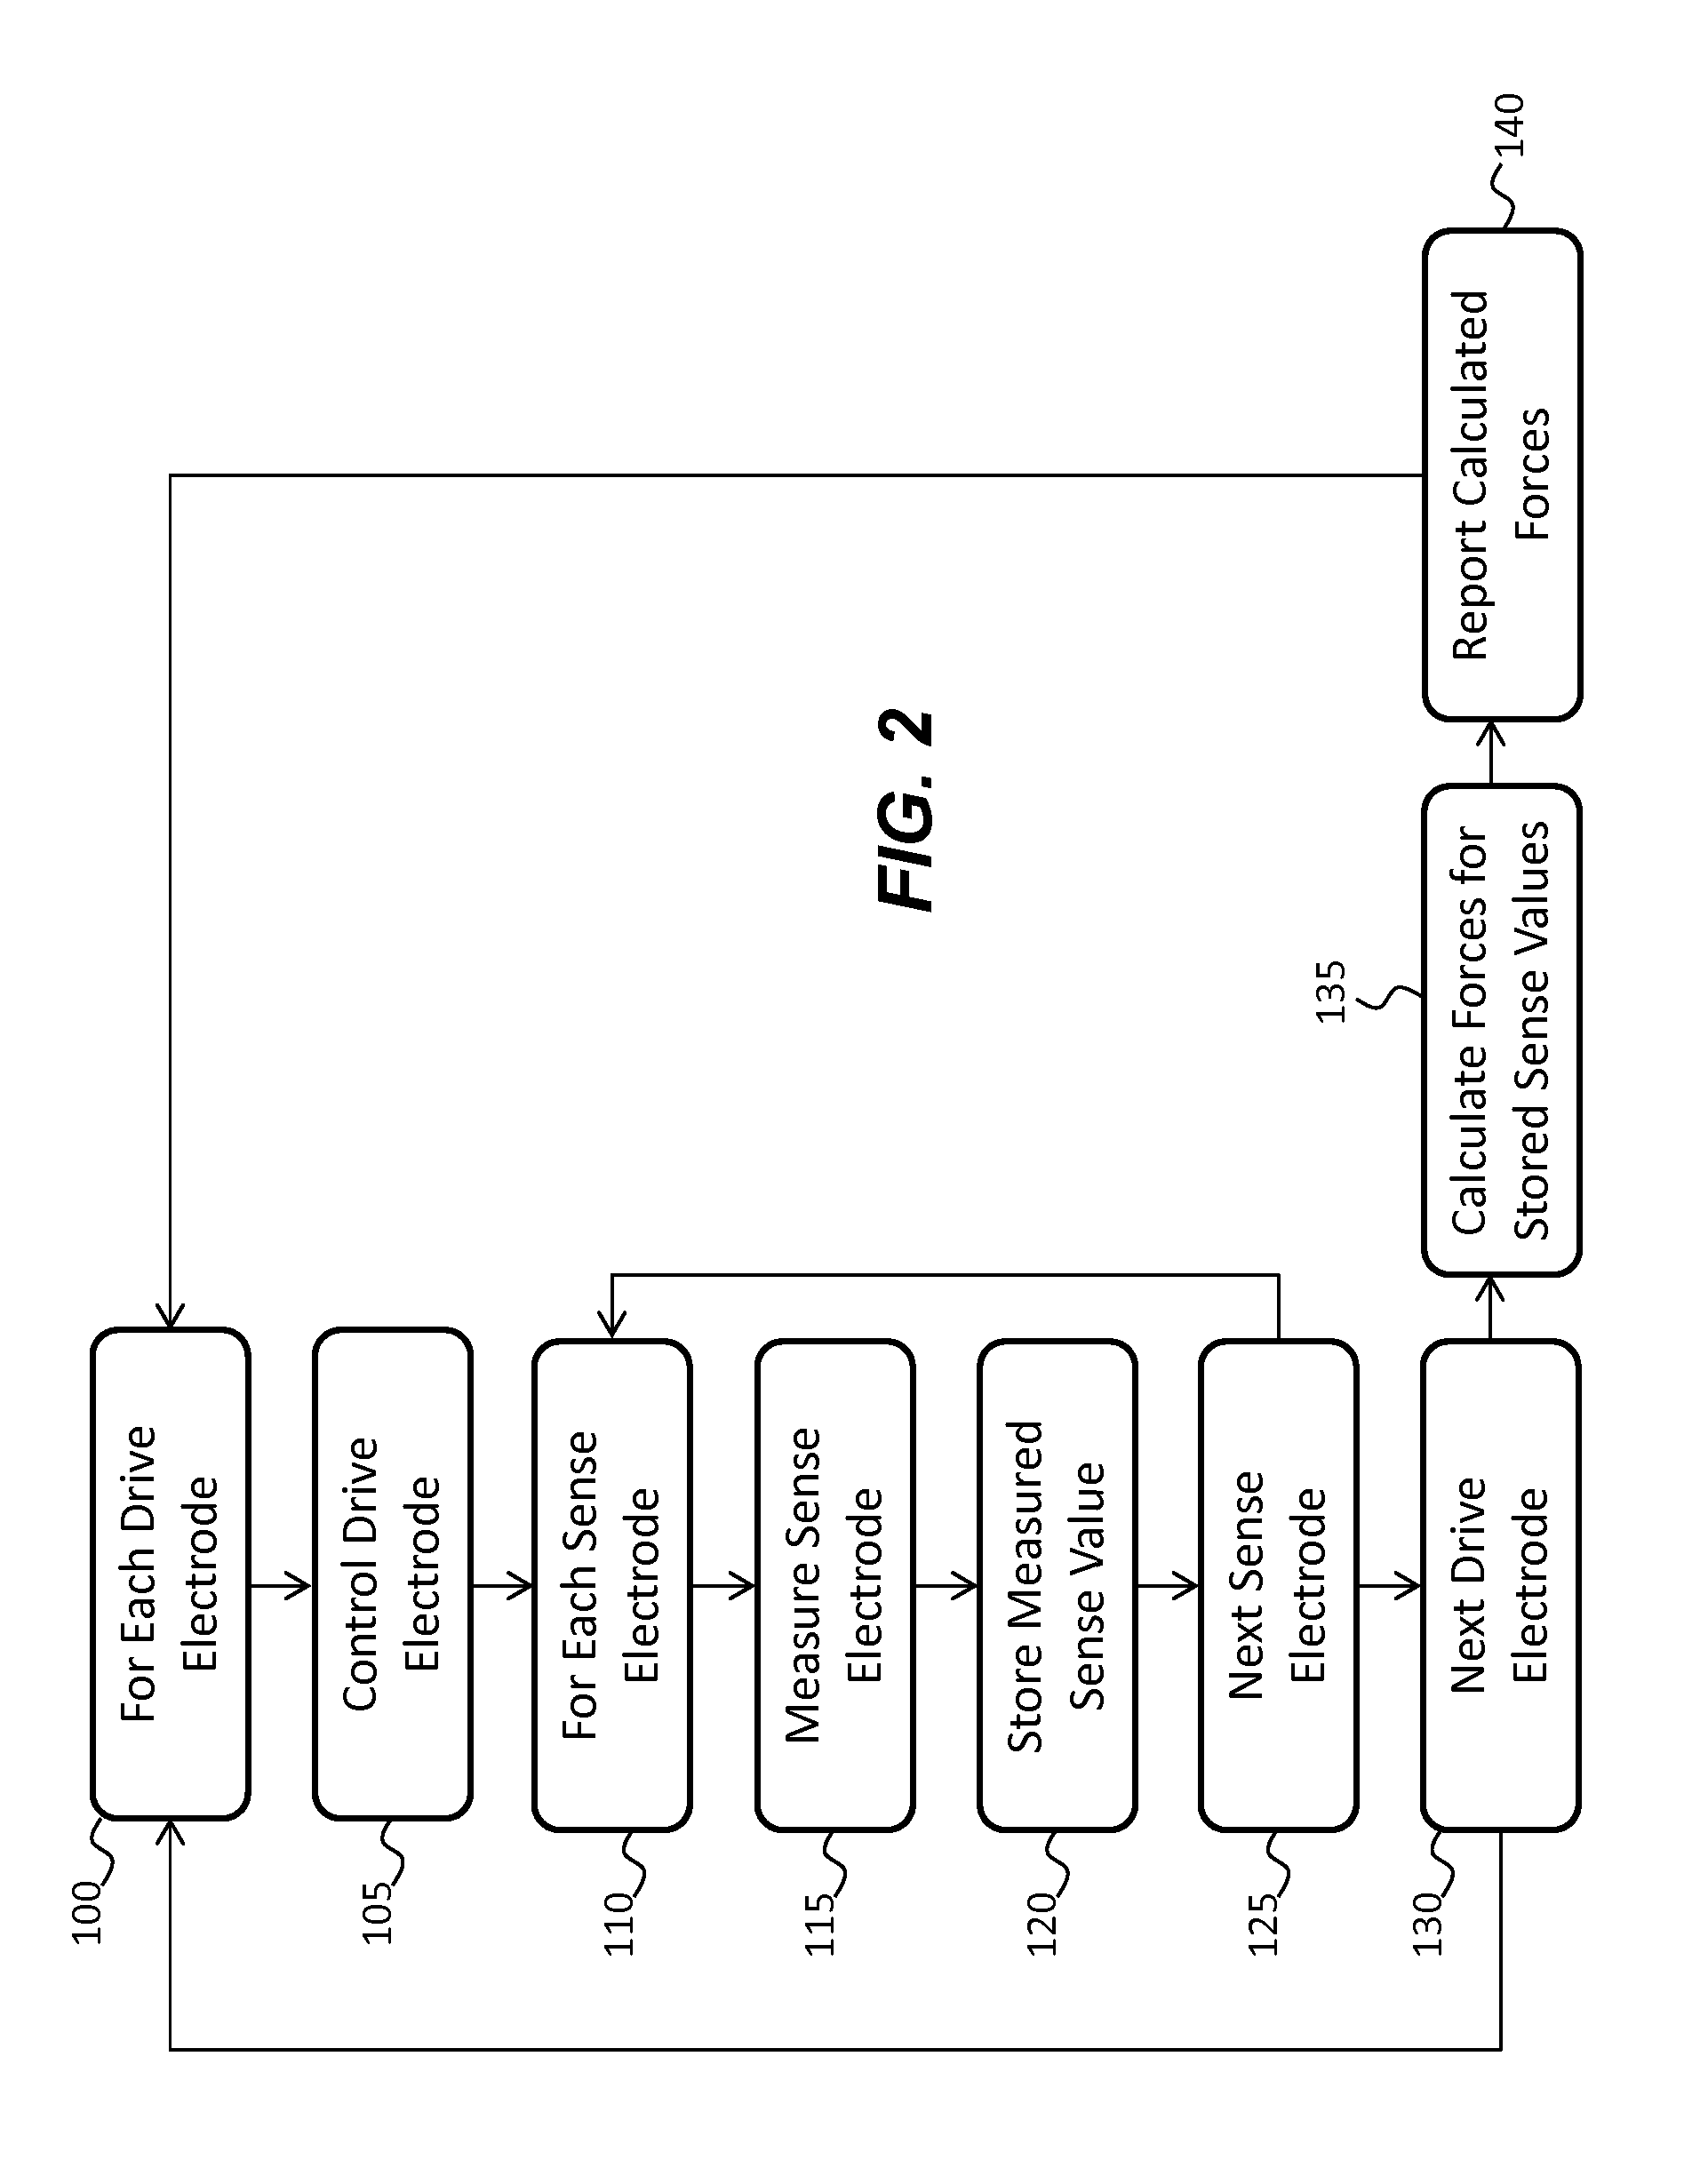 Capacitive touch screen with force detection